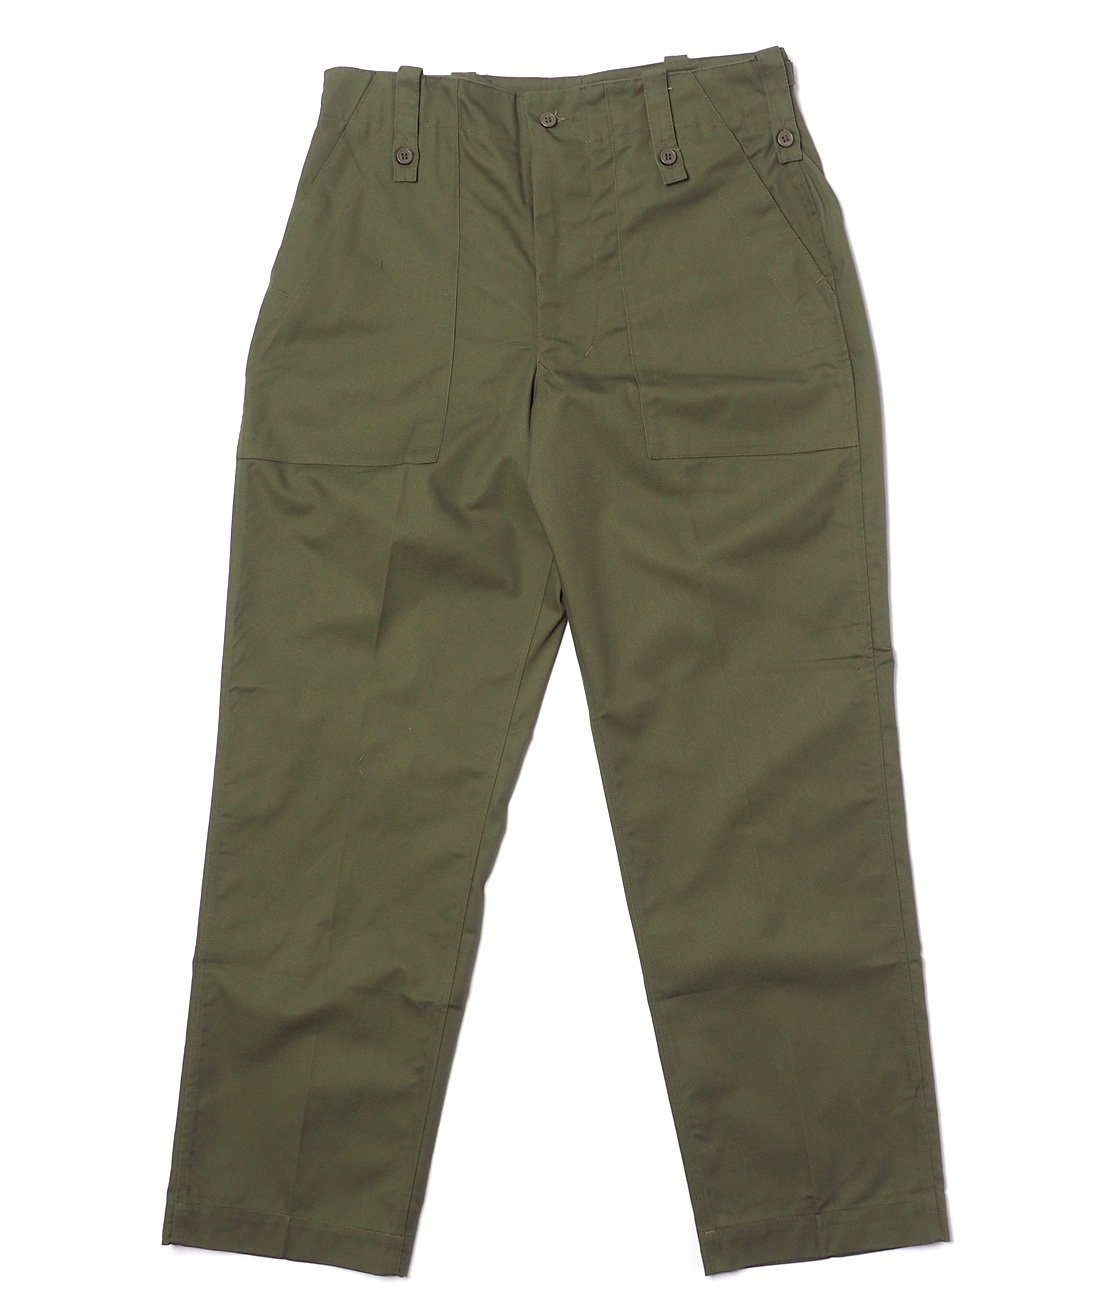 DEAD STOCK】BRITISH ARMY LIGHTWEIGHT TROUSERS - OLIVE イギリス軍 